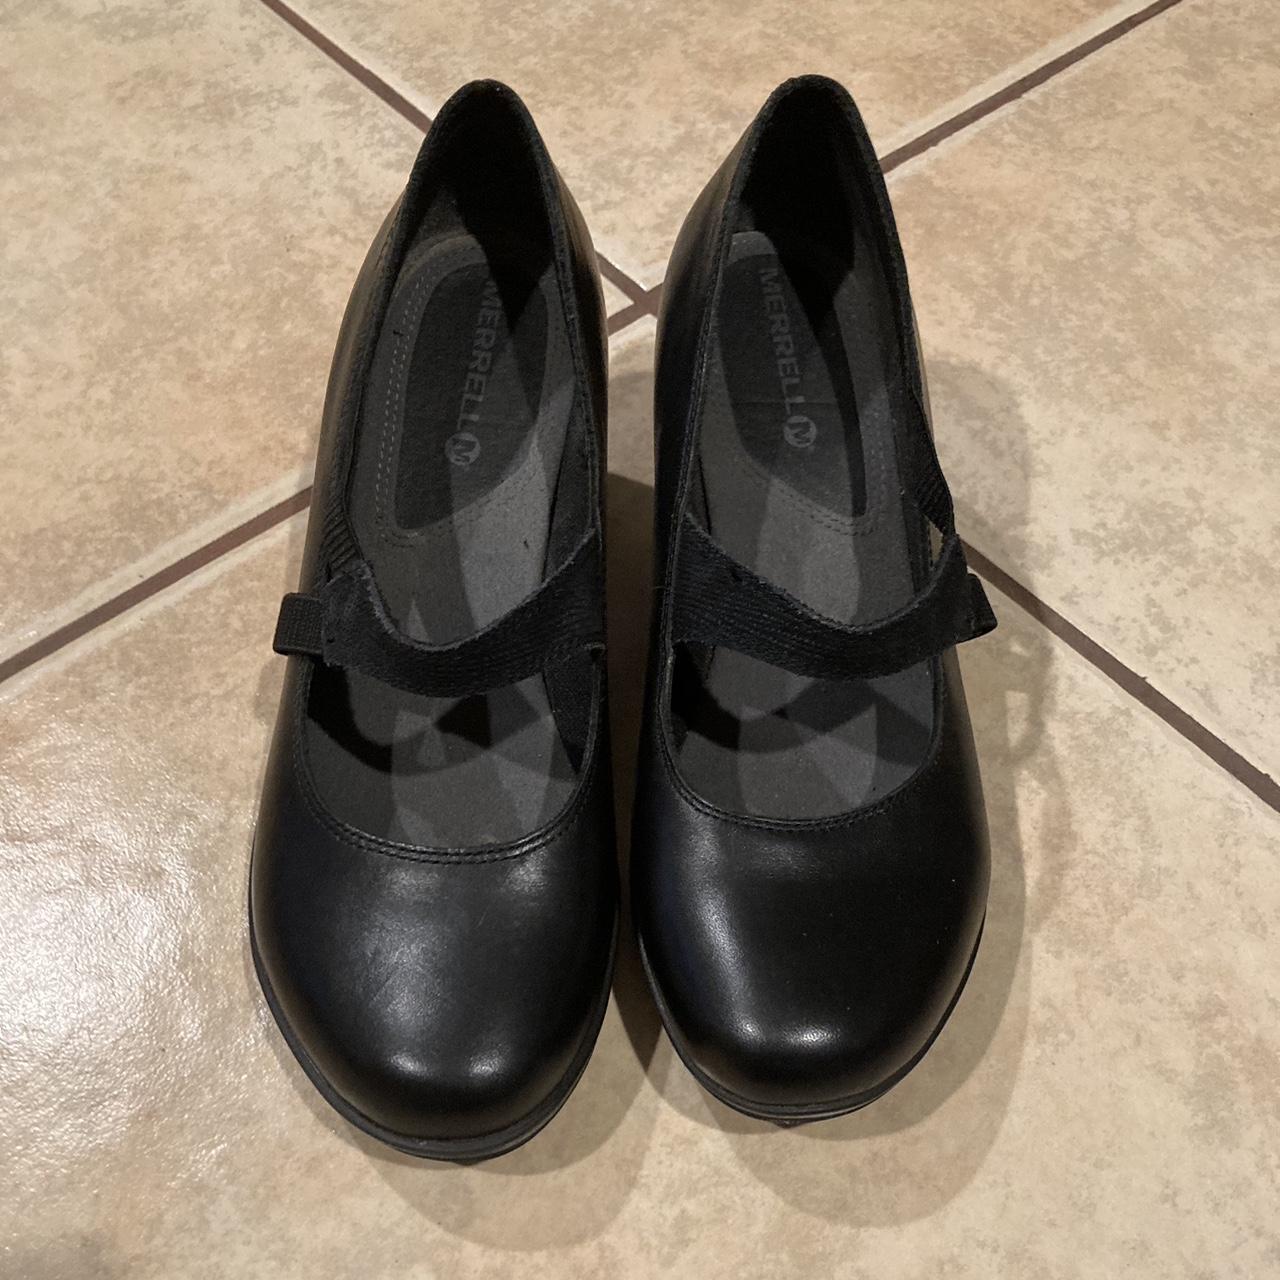 Merrill womens shoes Size 9.5 Preowned in... - Depop